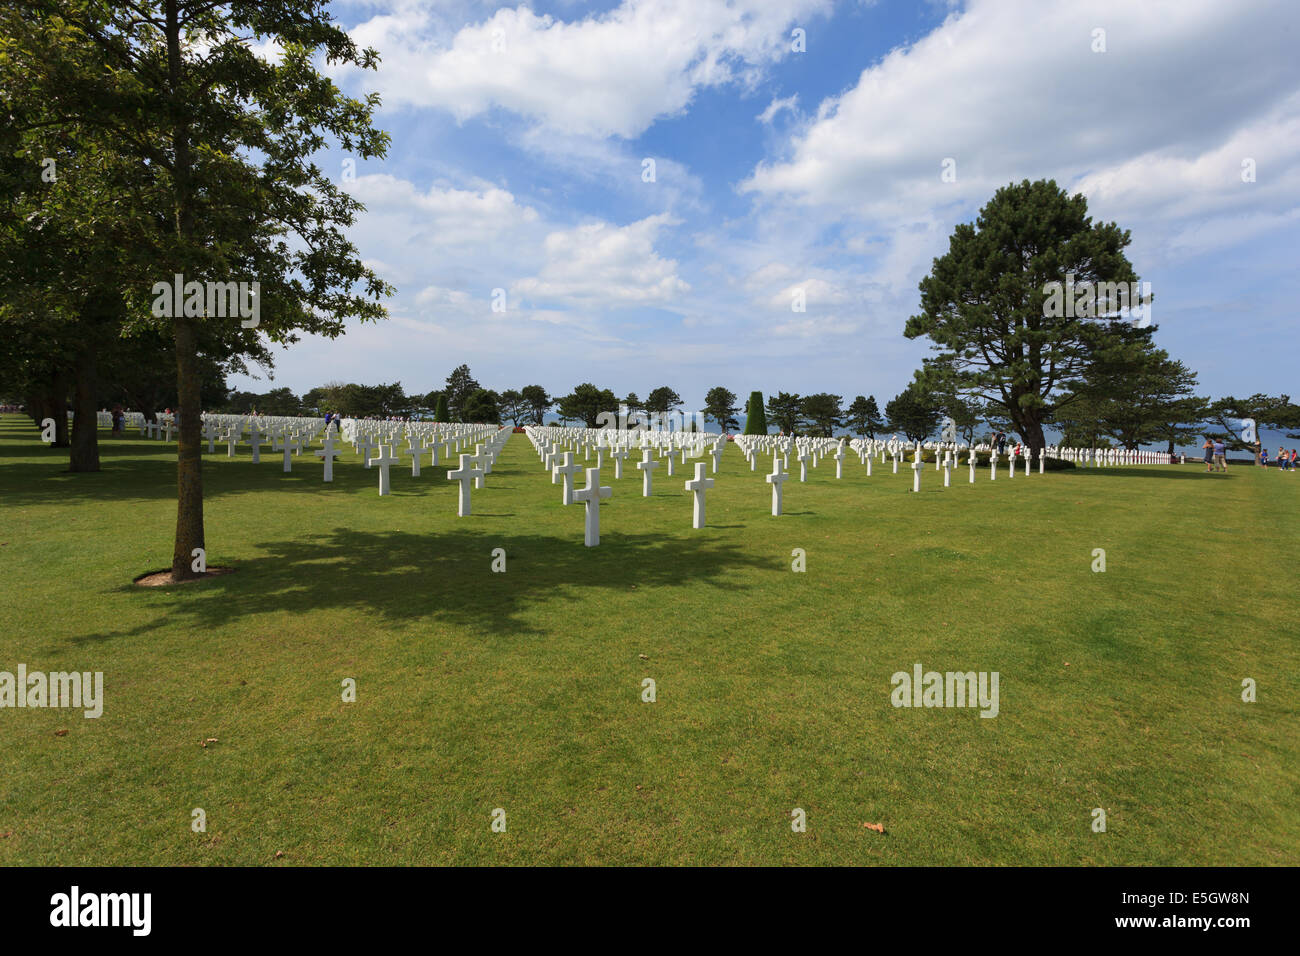 The American cemetery at Omaha Beach, Normandy, France. Here is about 10,000 American soldiers buried. Stock Photo